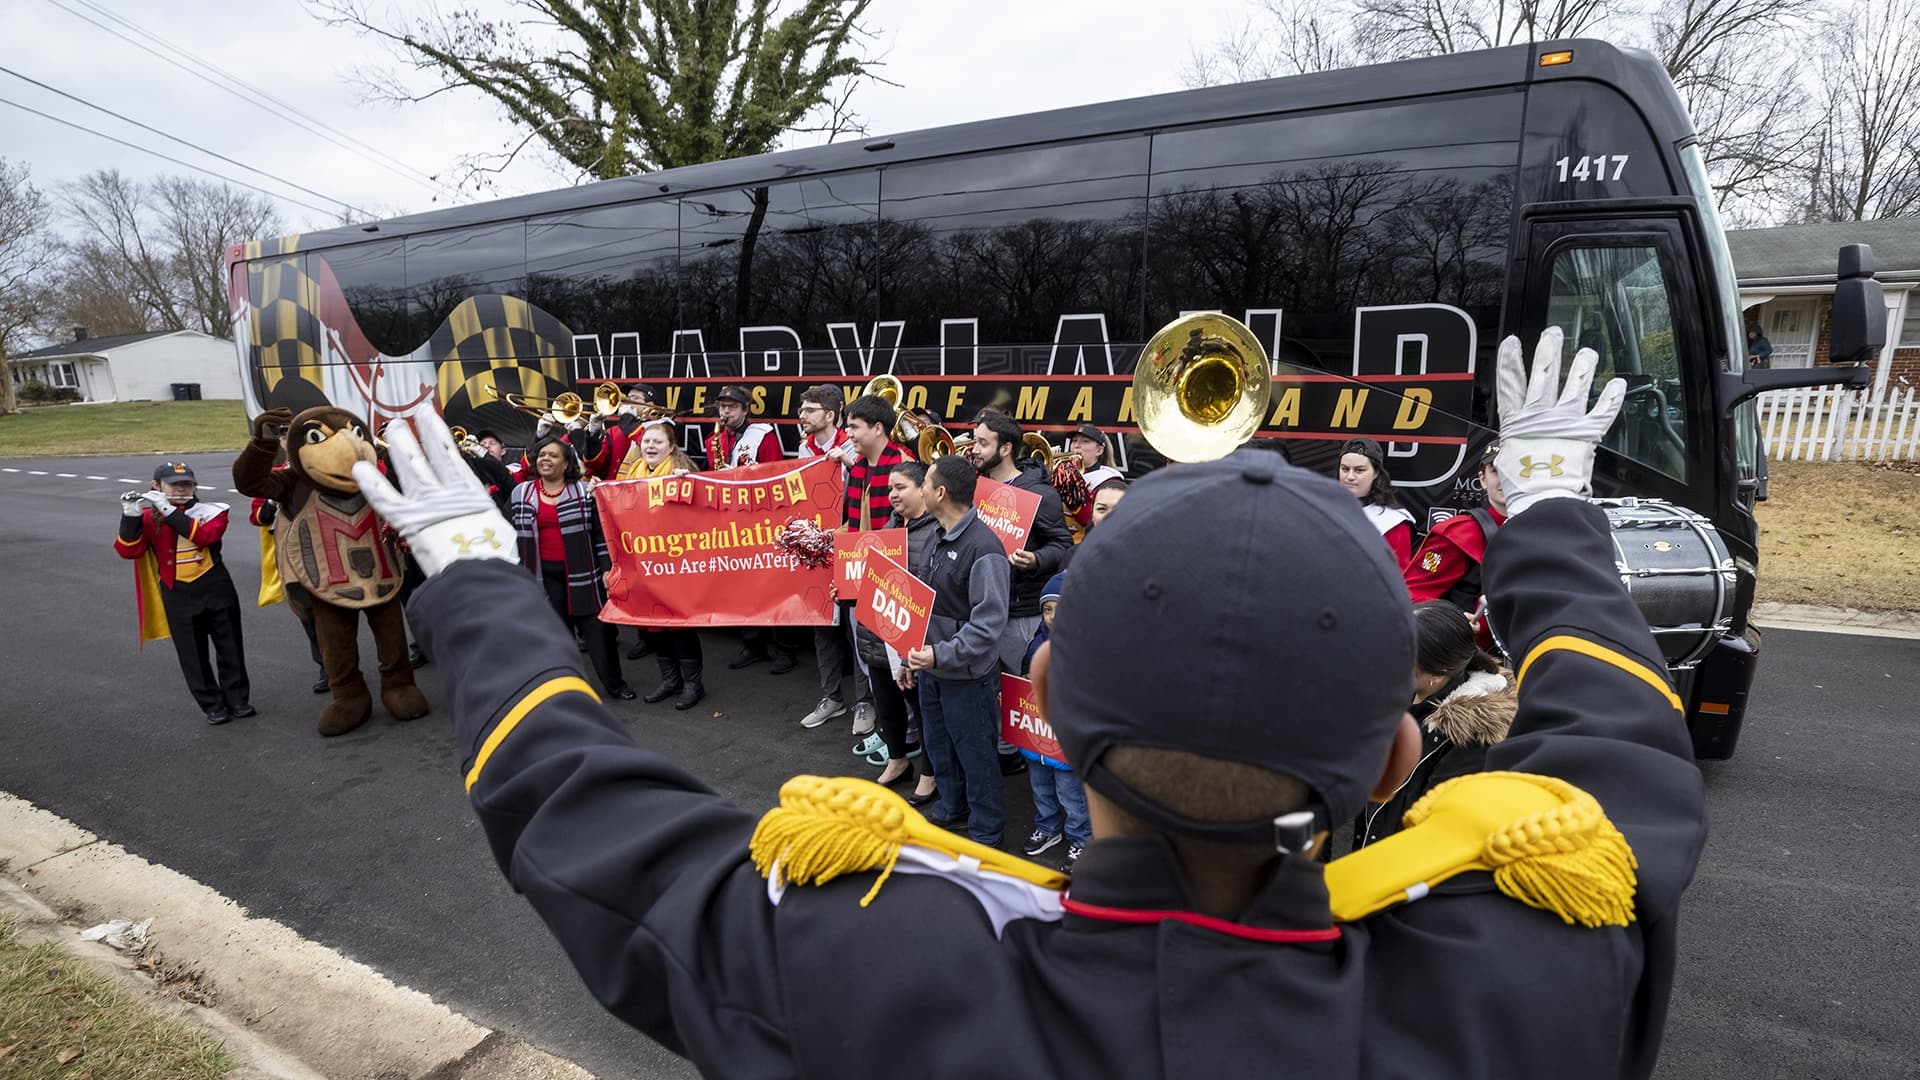 UMD marching band plays outside bus as family celebrates